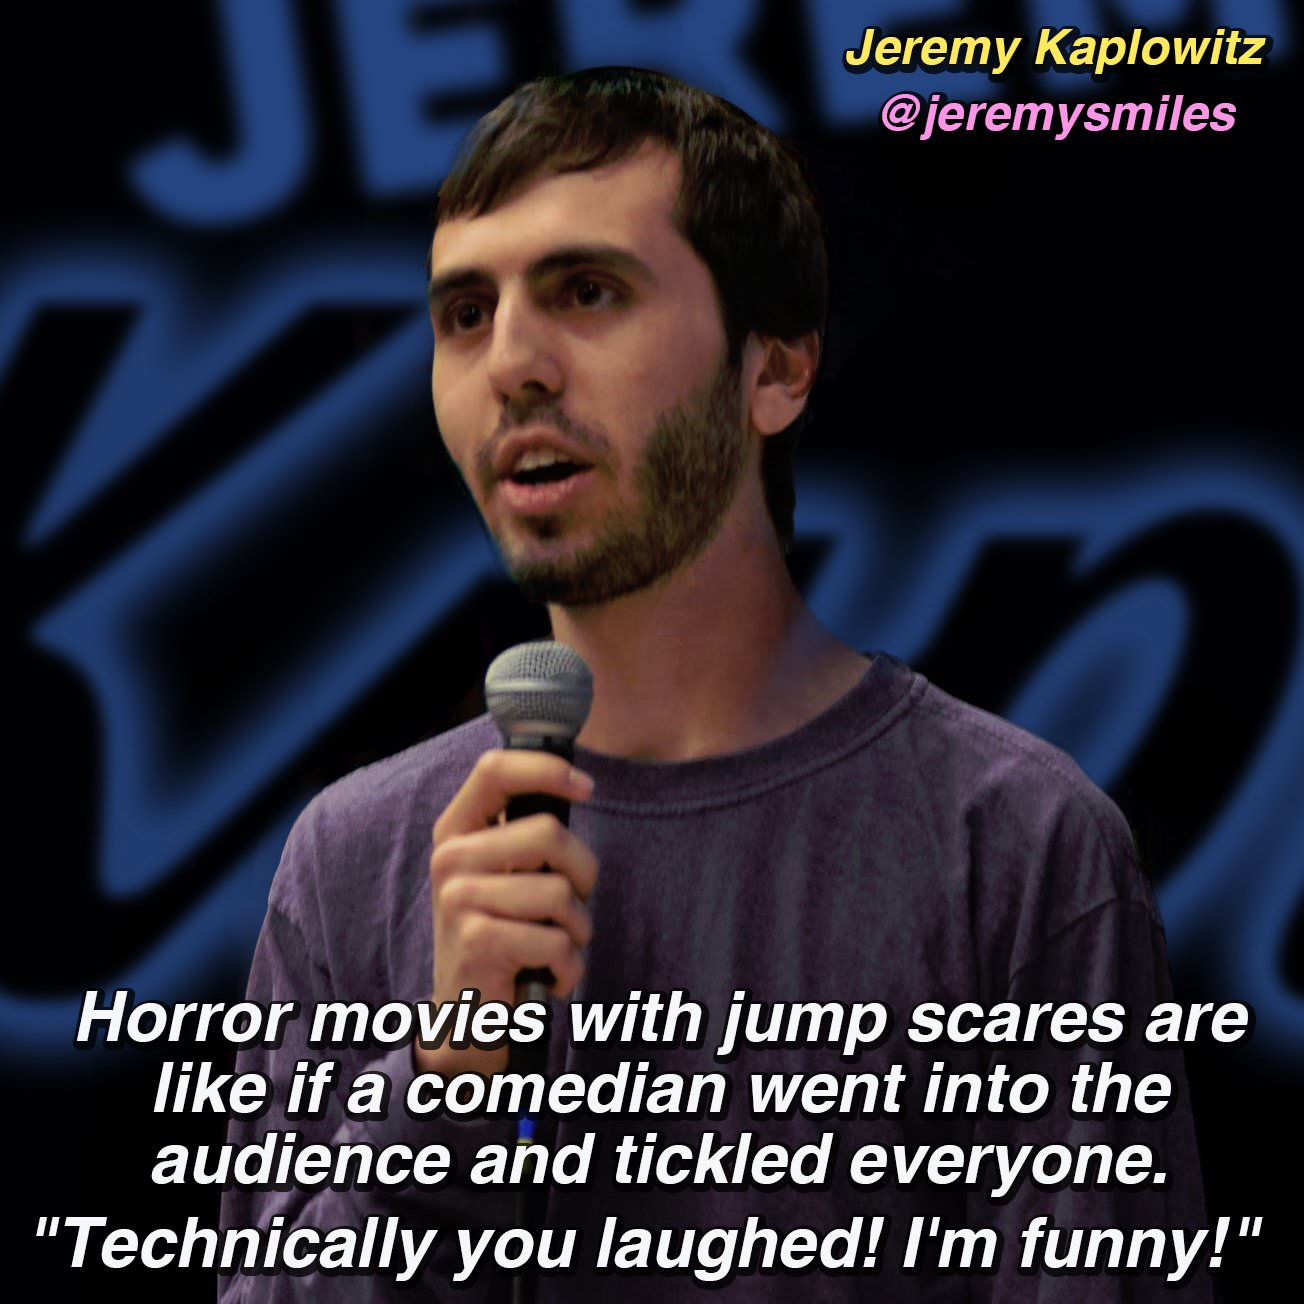 homophobes are secretly gay - Jeremy Kaplowitz Horror movies with jump scares are if a comedian went into the audience and tickled everyone. "Technically you laughed! I'm funny!"